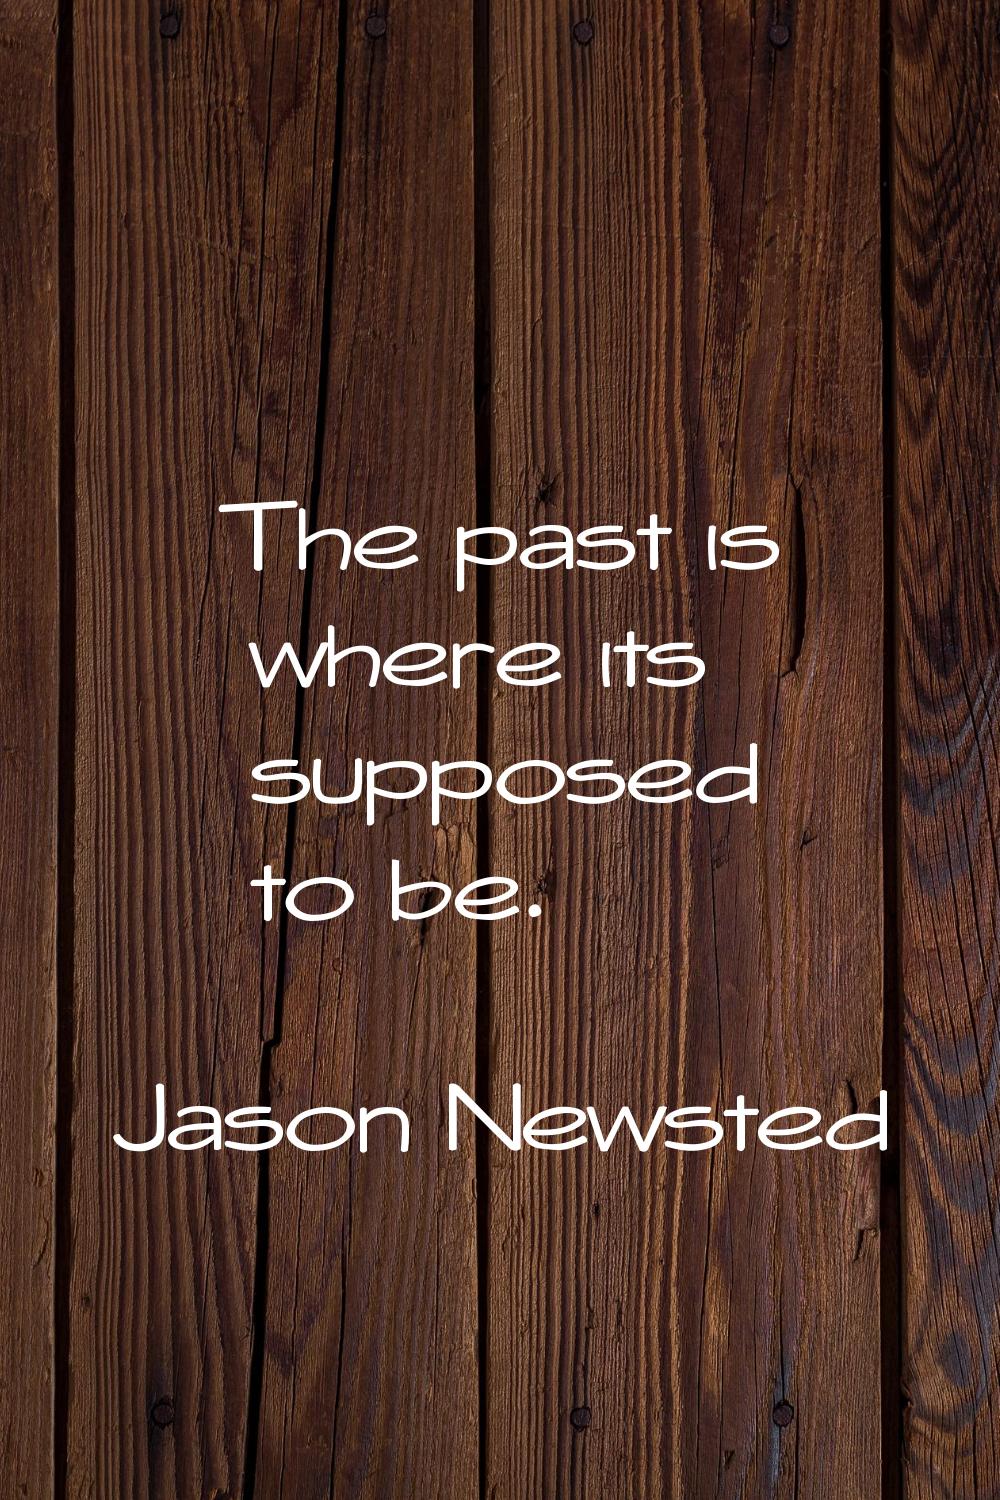 The past is where its supposed to be.